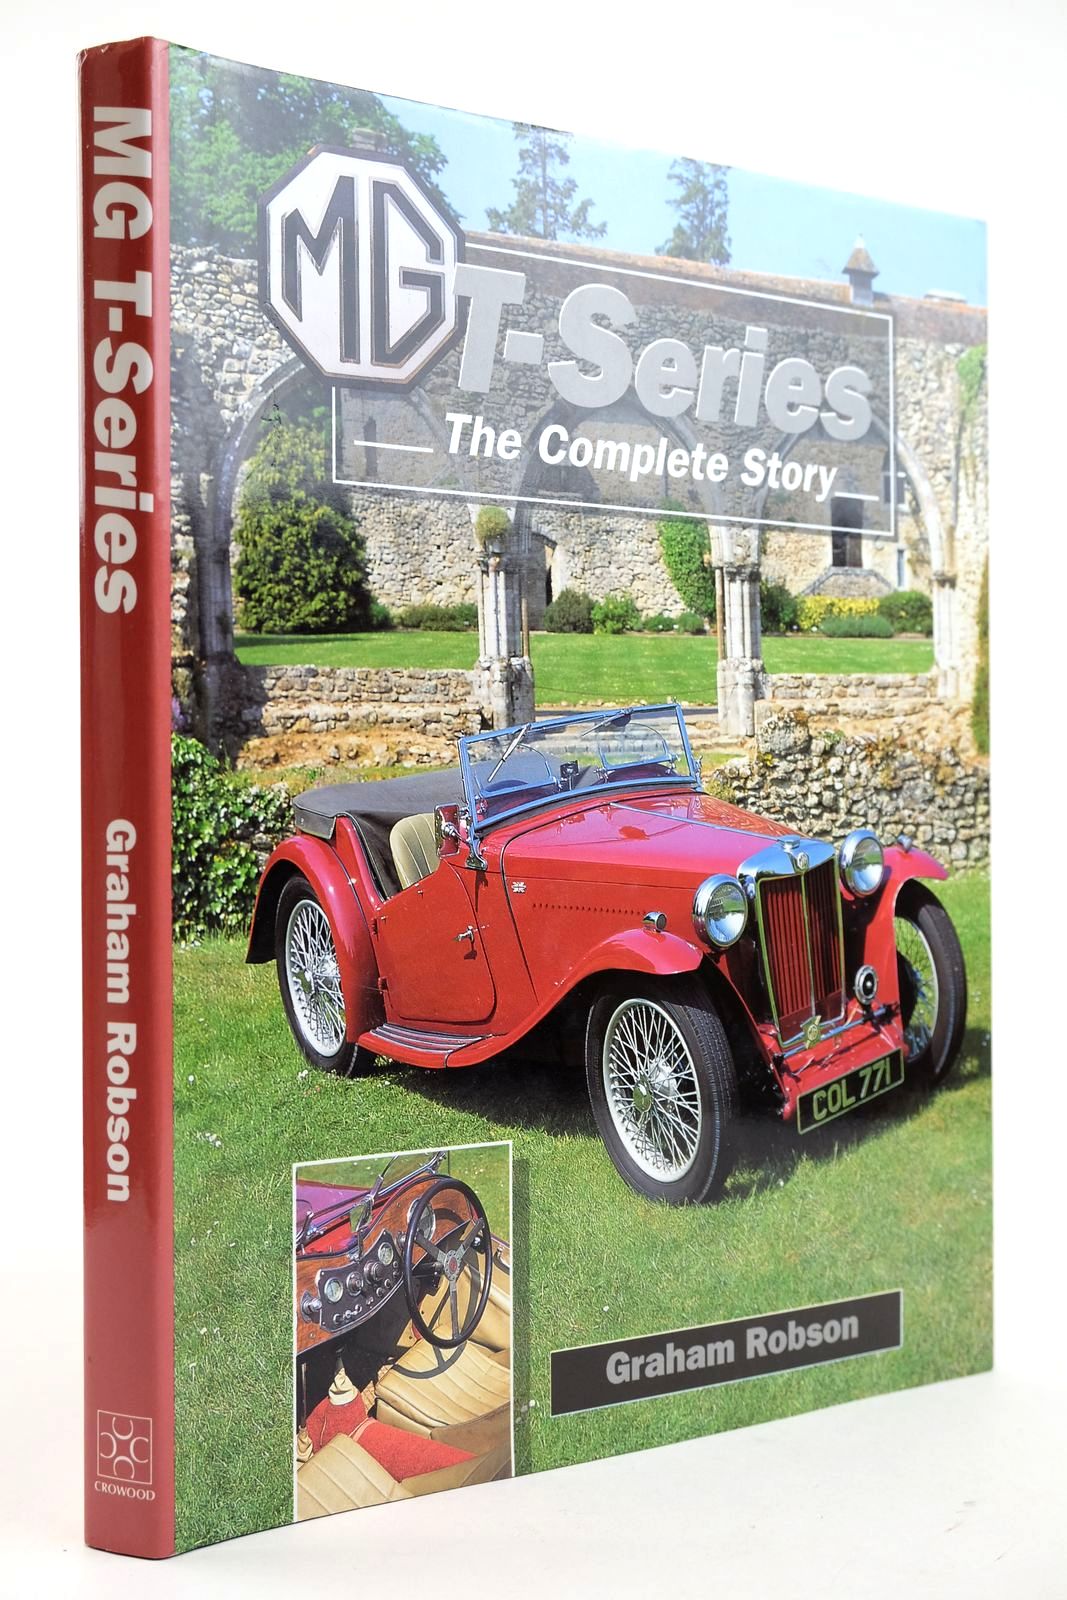 Photo of MG T-SERIES THE COMPLETE STORY (CROWOOD AUTOCLASSIC) written by Robson, Graham published by The Crowood Press (STOCK CODE: 2132725)  for sale by Stella & Rose's Books